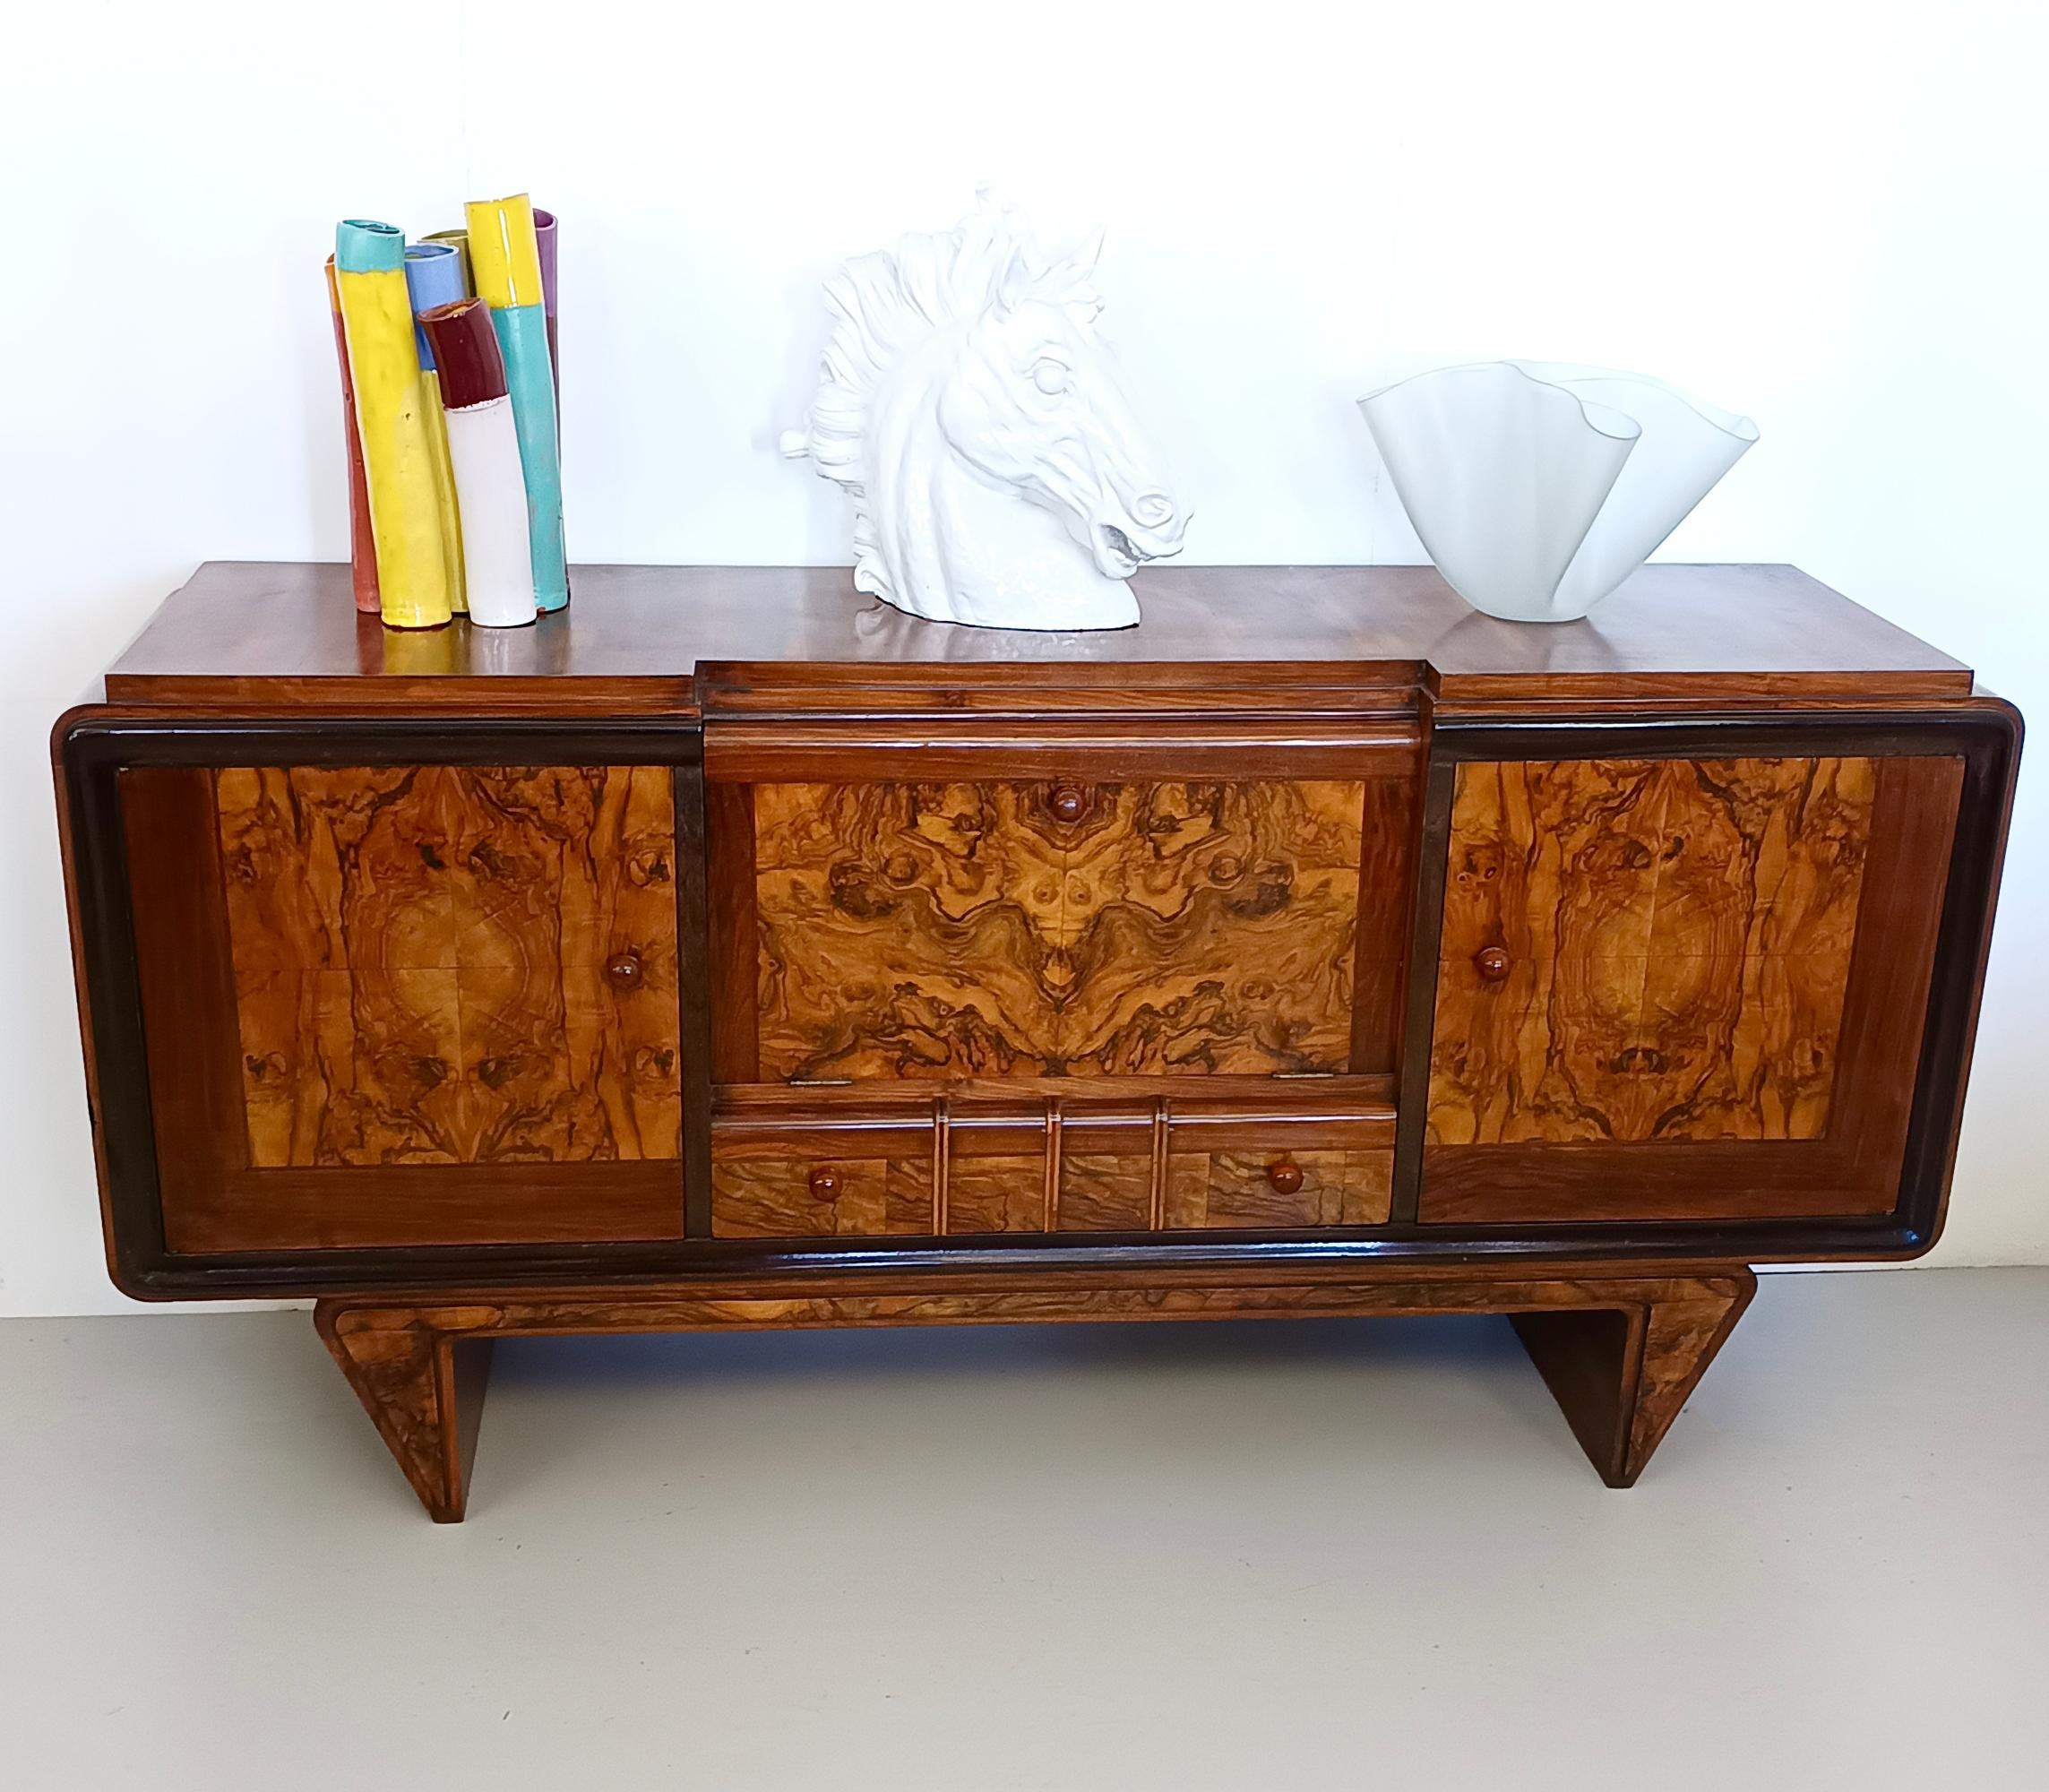 Made in Italy, 1940s. 
This stunning and elegant sideboard is made in walnut, briar root and ebonized beech and features bachelite handles. 
It is a vintage item, therefore it might show slight traces of use, but it can be considered as in excellent